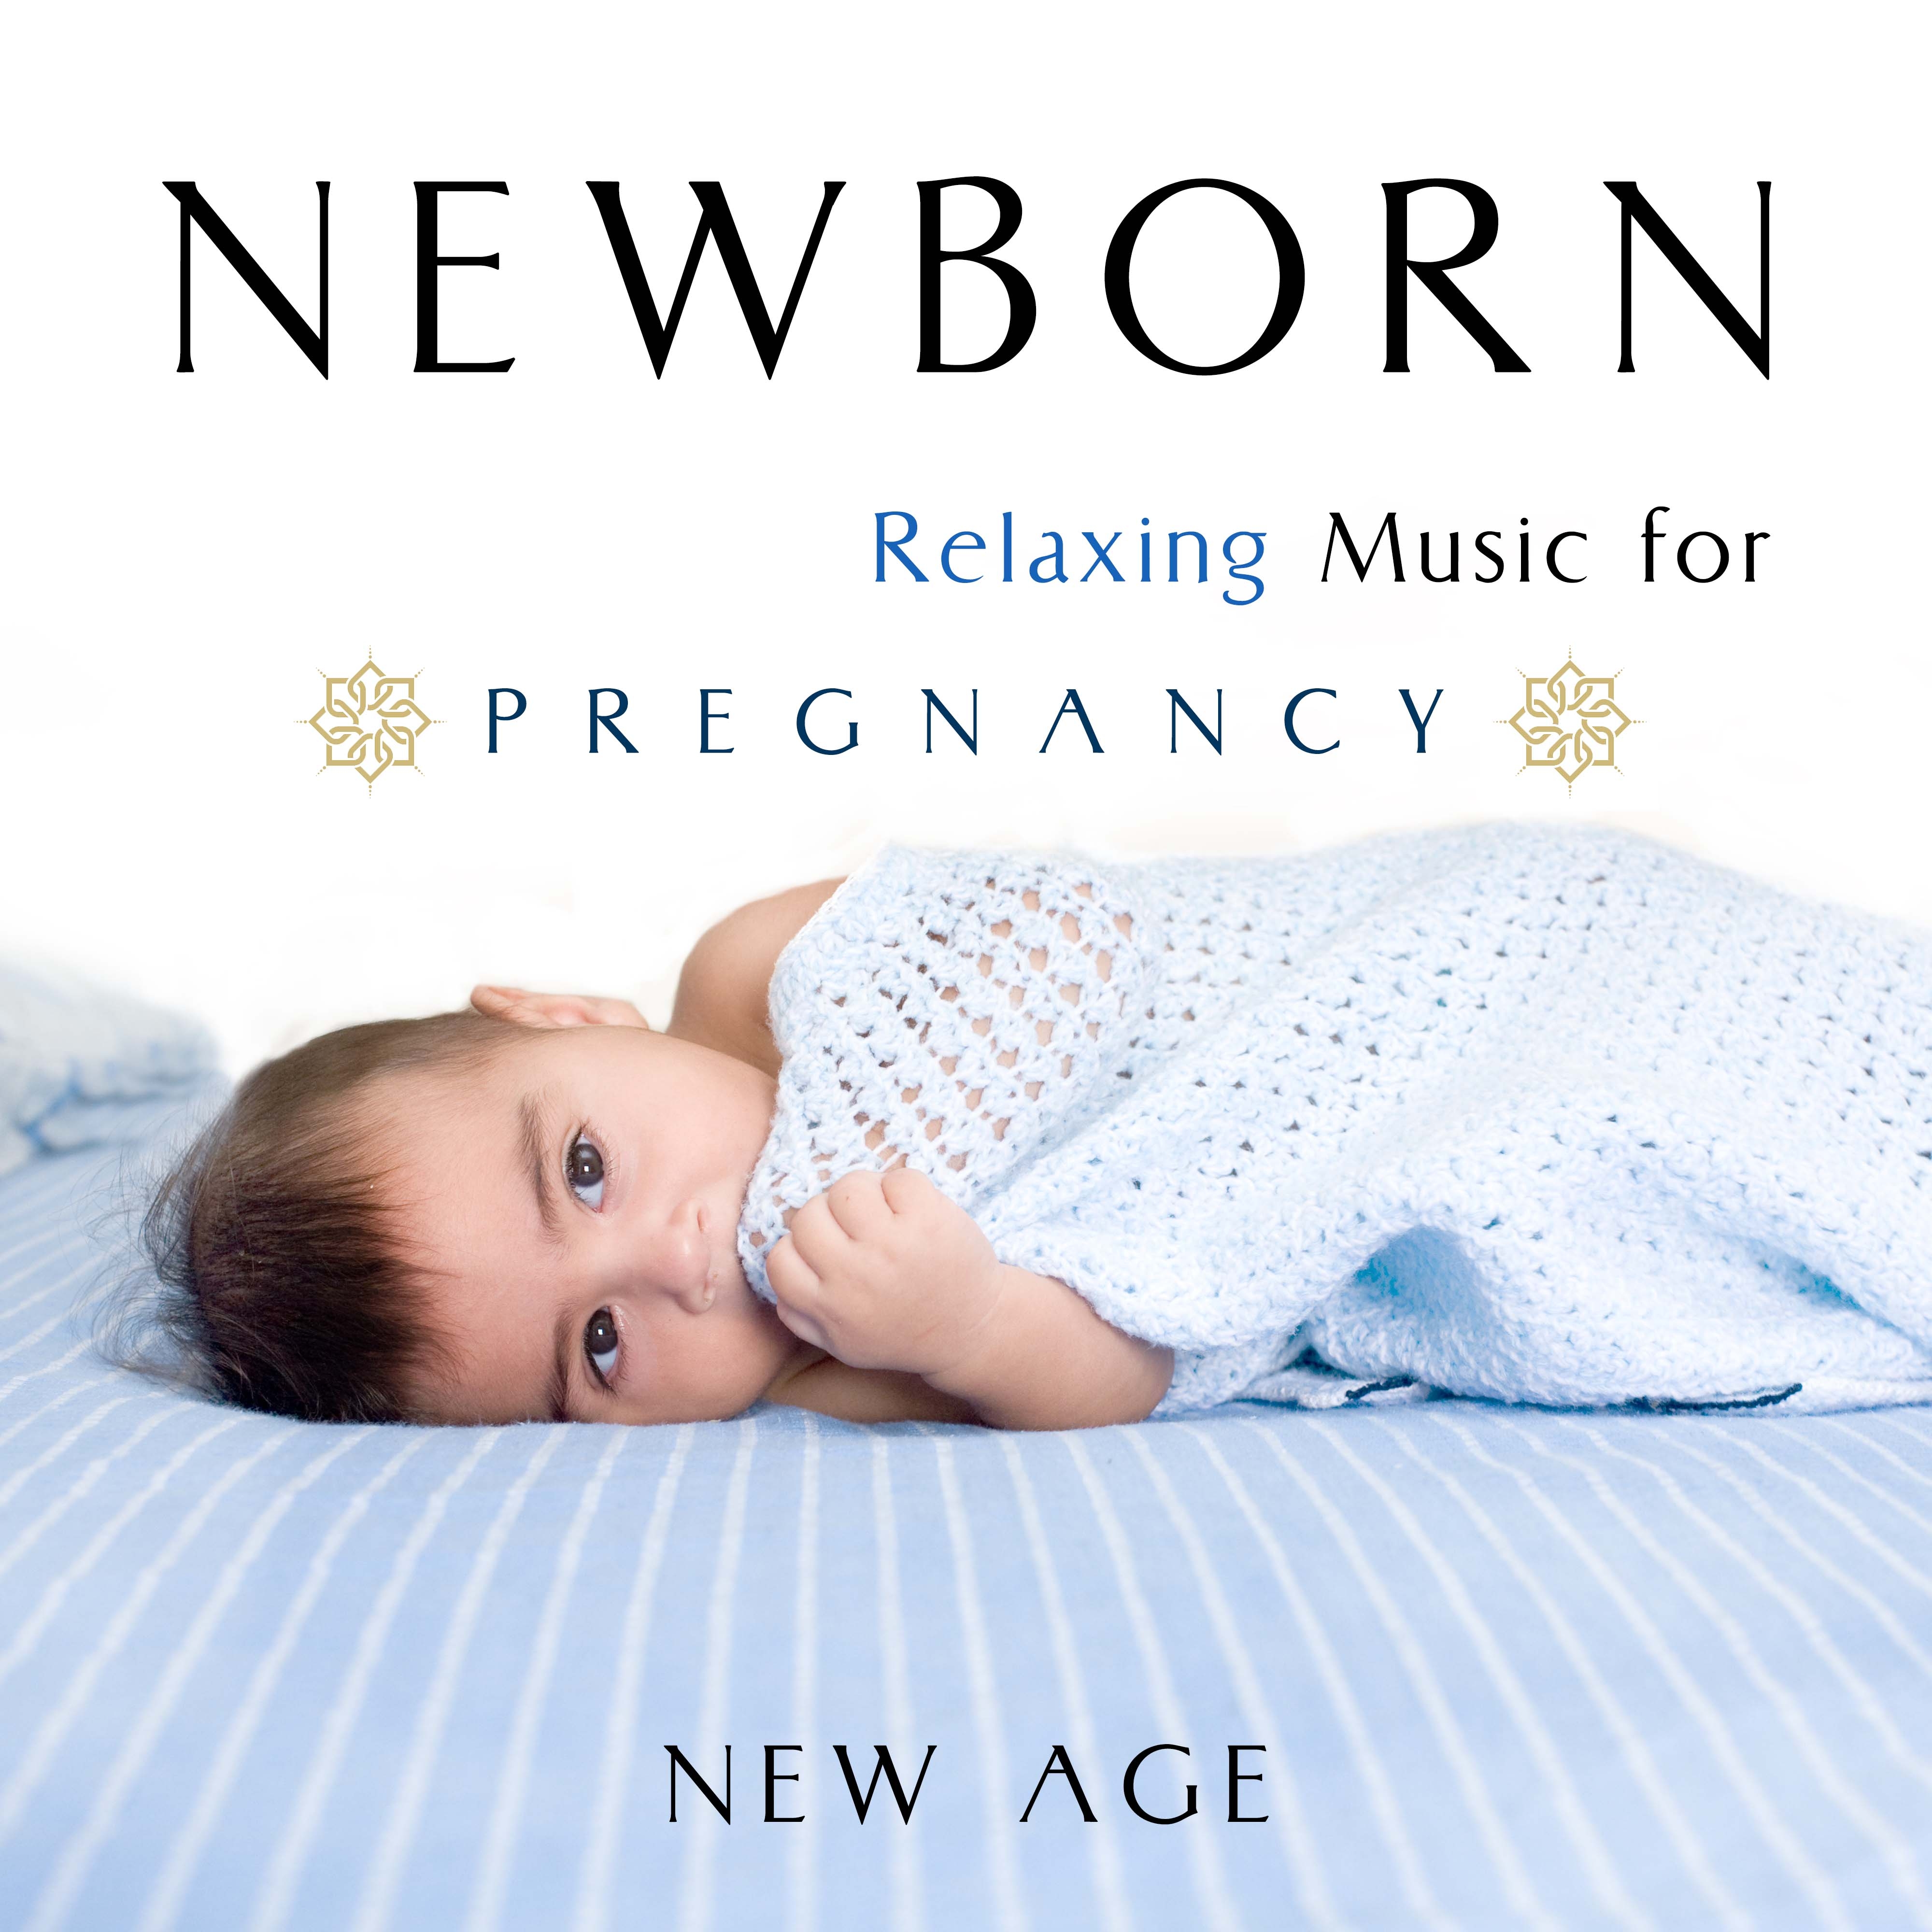 Newborn: Relaxing Music for Pregnancy and Lullabies for Babies to Go to Sleep